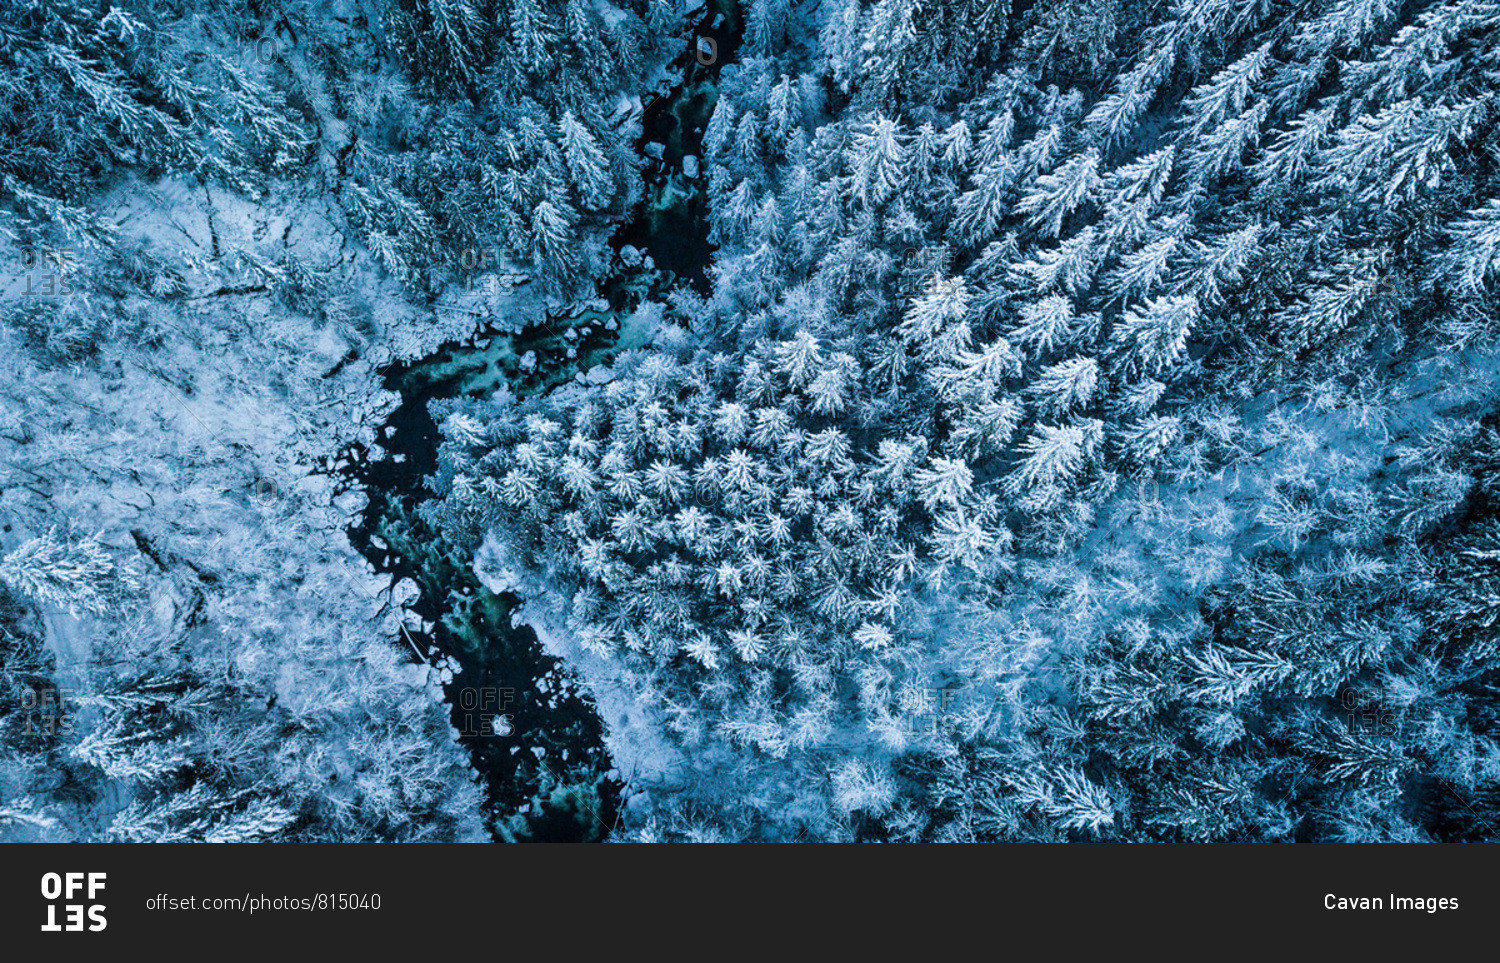 Winter river aerial photography - Offset stock photo -
OFFSET